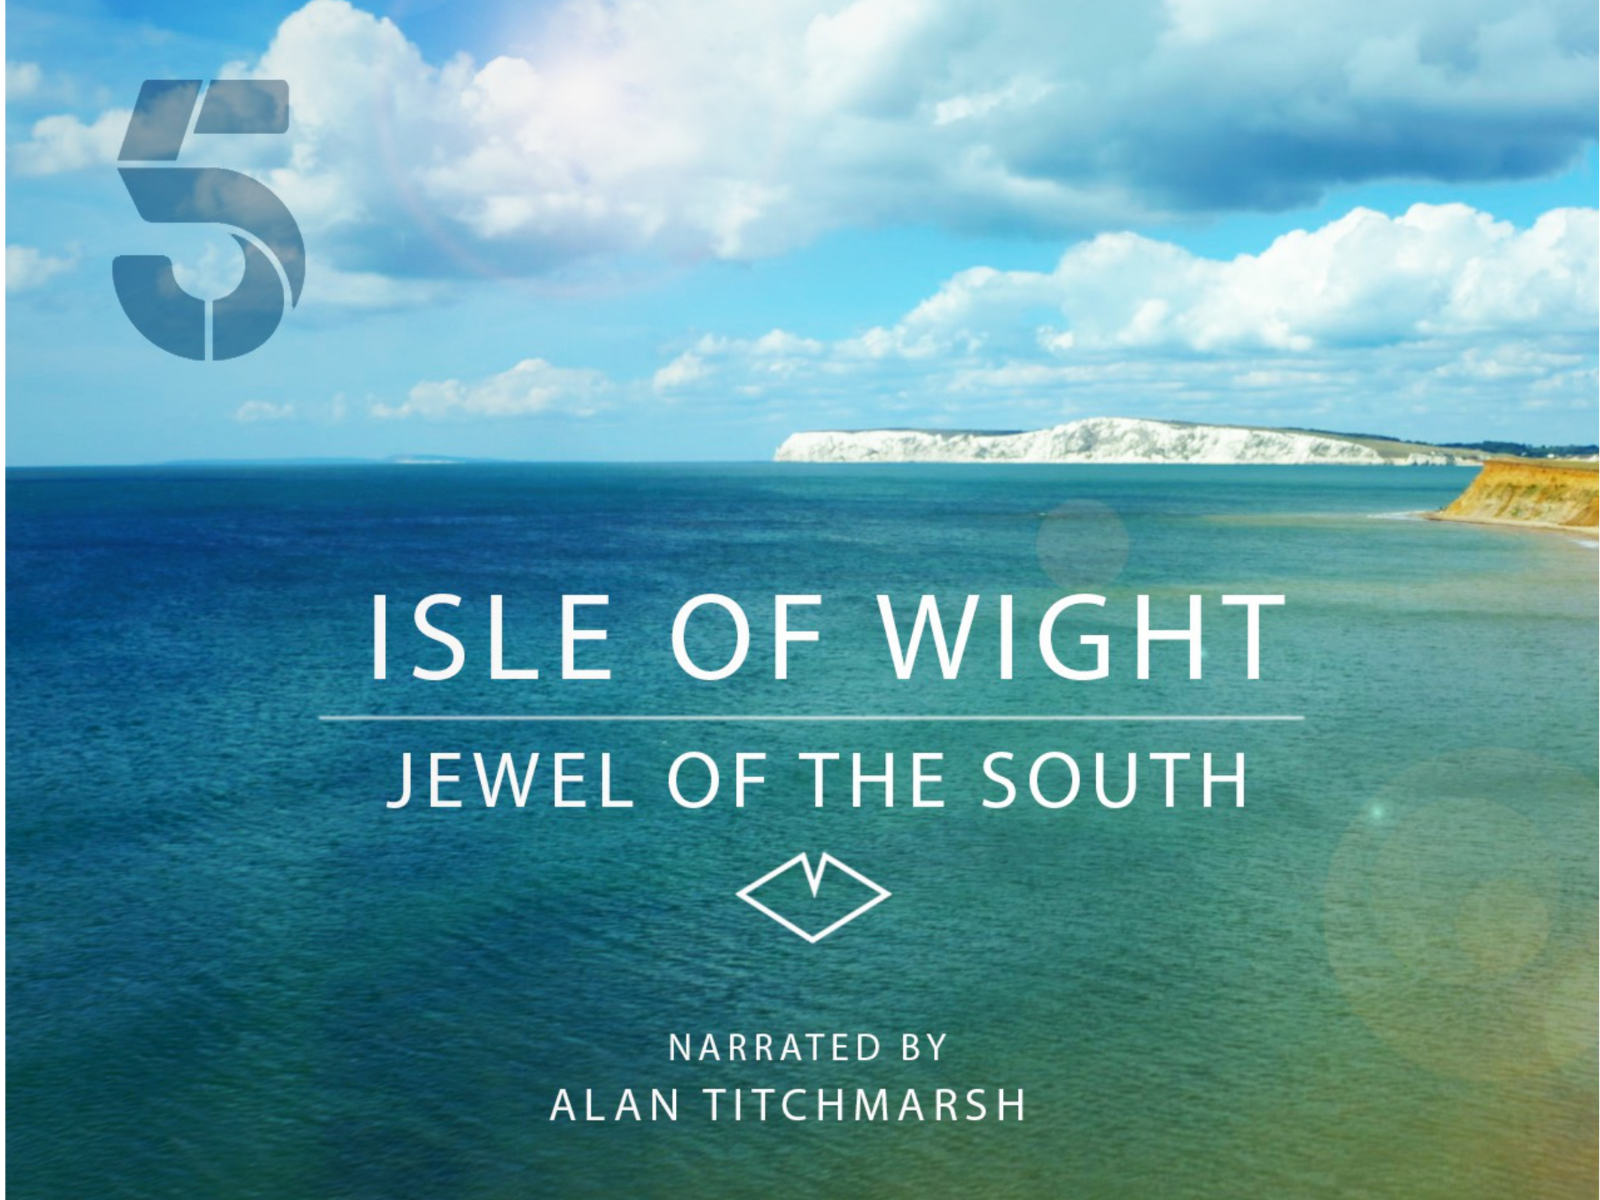 A background image of the coastline and sea around the Isle of Wight overlaid with 'Isle of Wight, Jewel of the South'